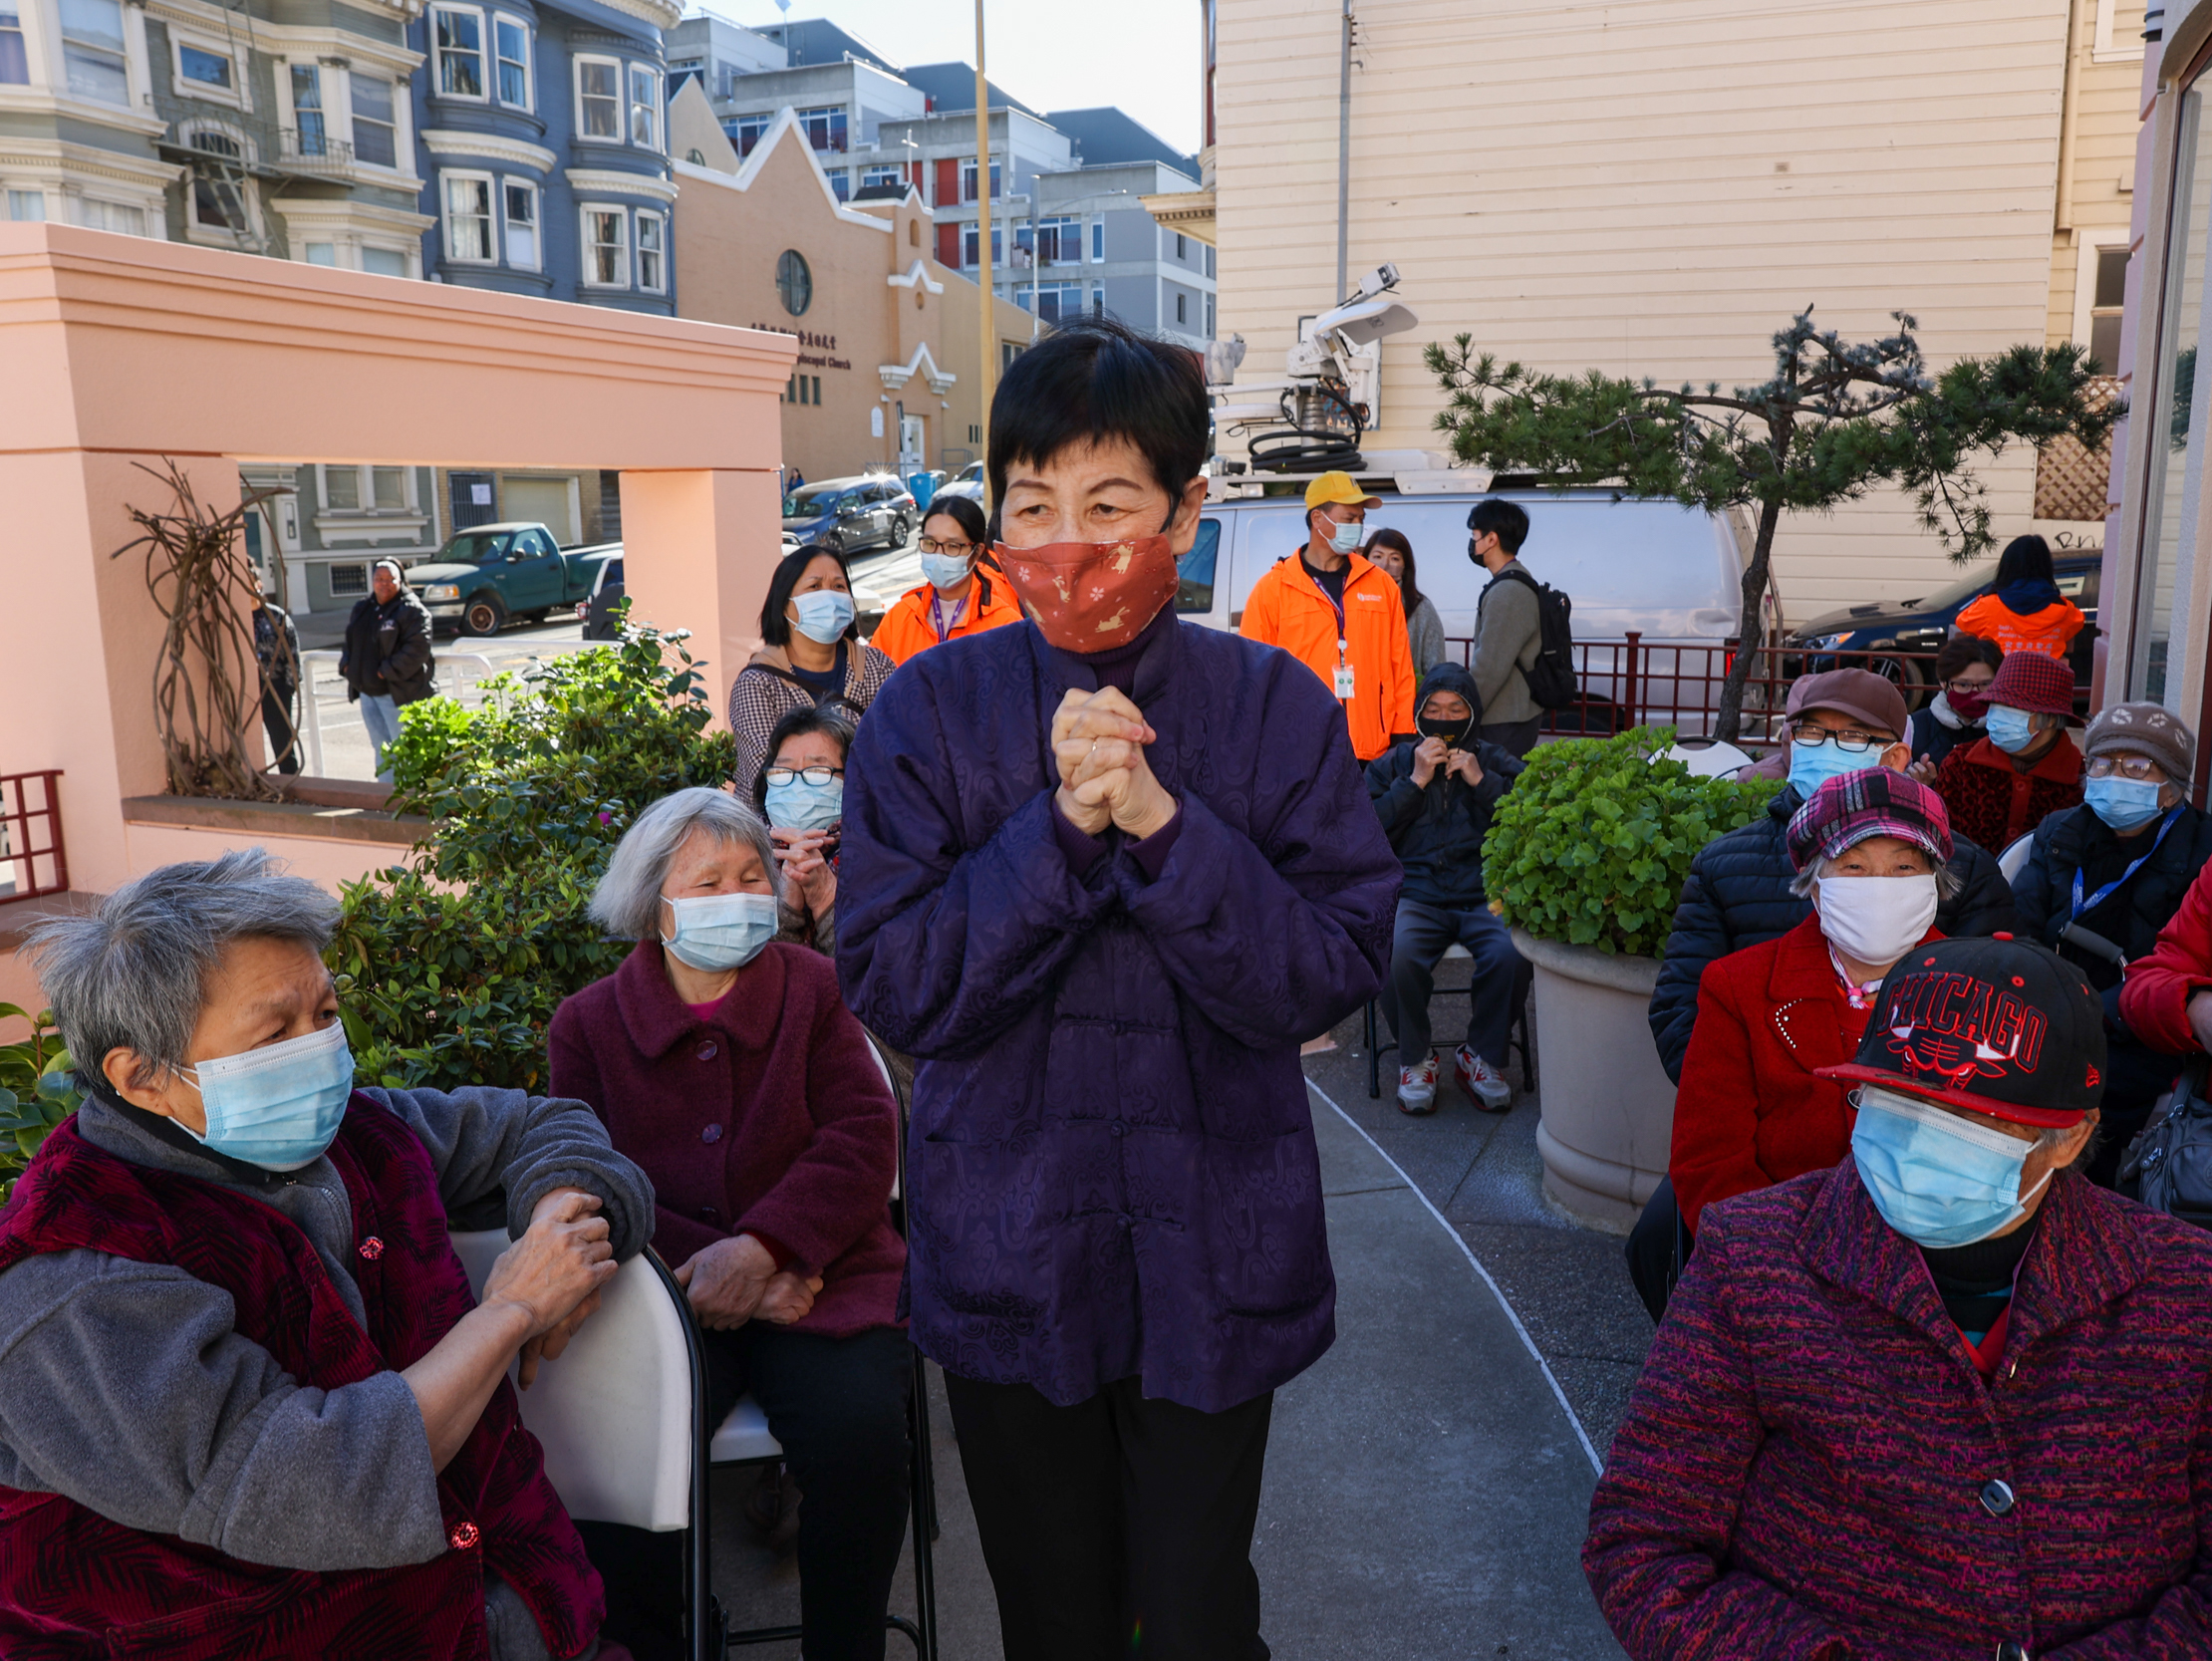 A group of masked seniors gather outdoors; a central figure in purple seems to be speaking or gesturing. 